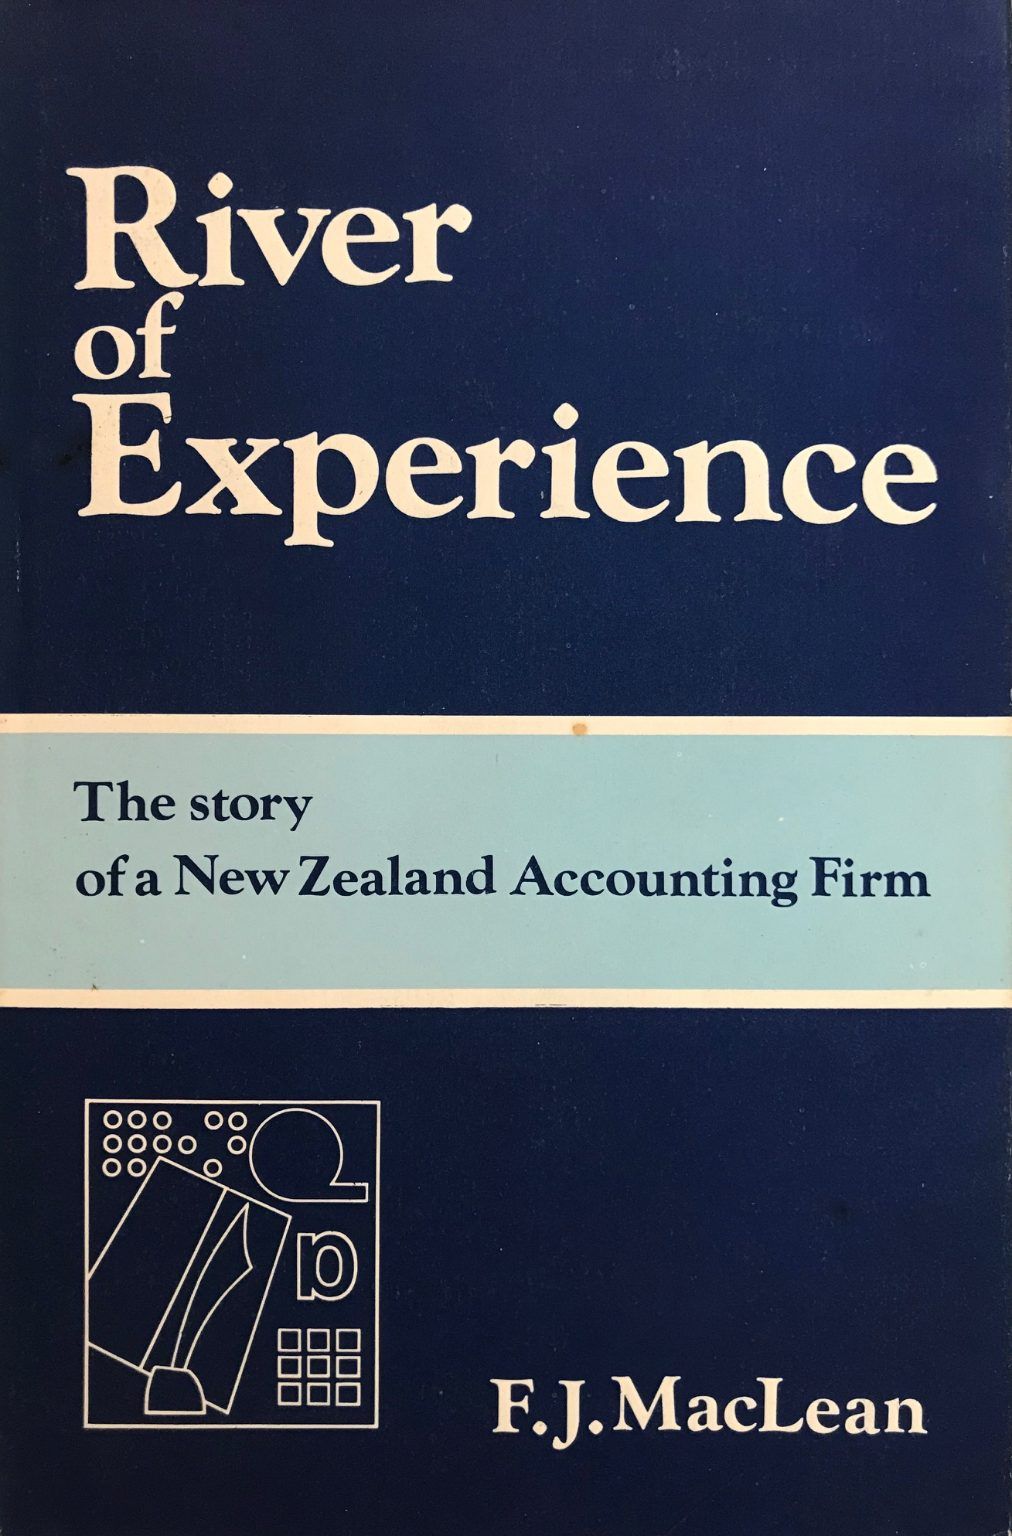 RIVER OF EXPERIENCE: The Story of a New Zealand Accounting Firm